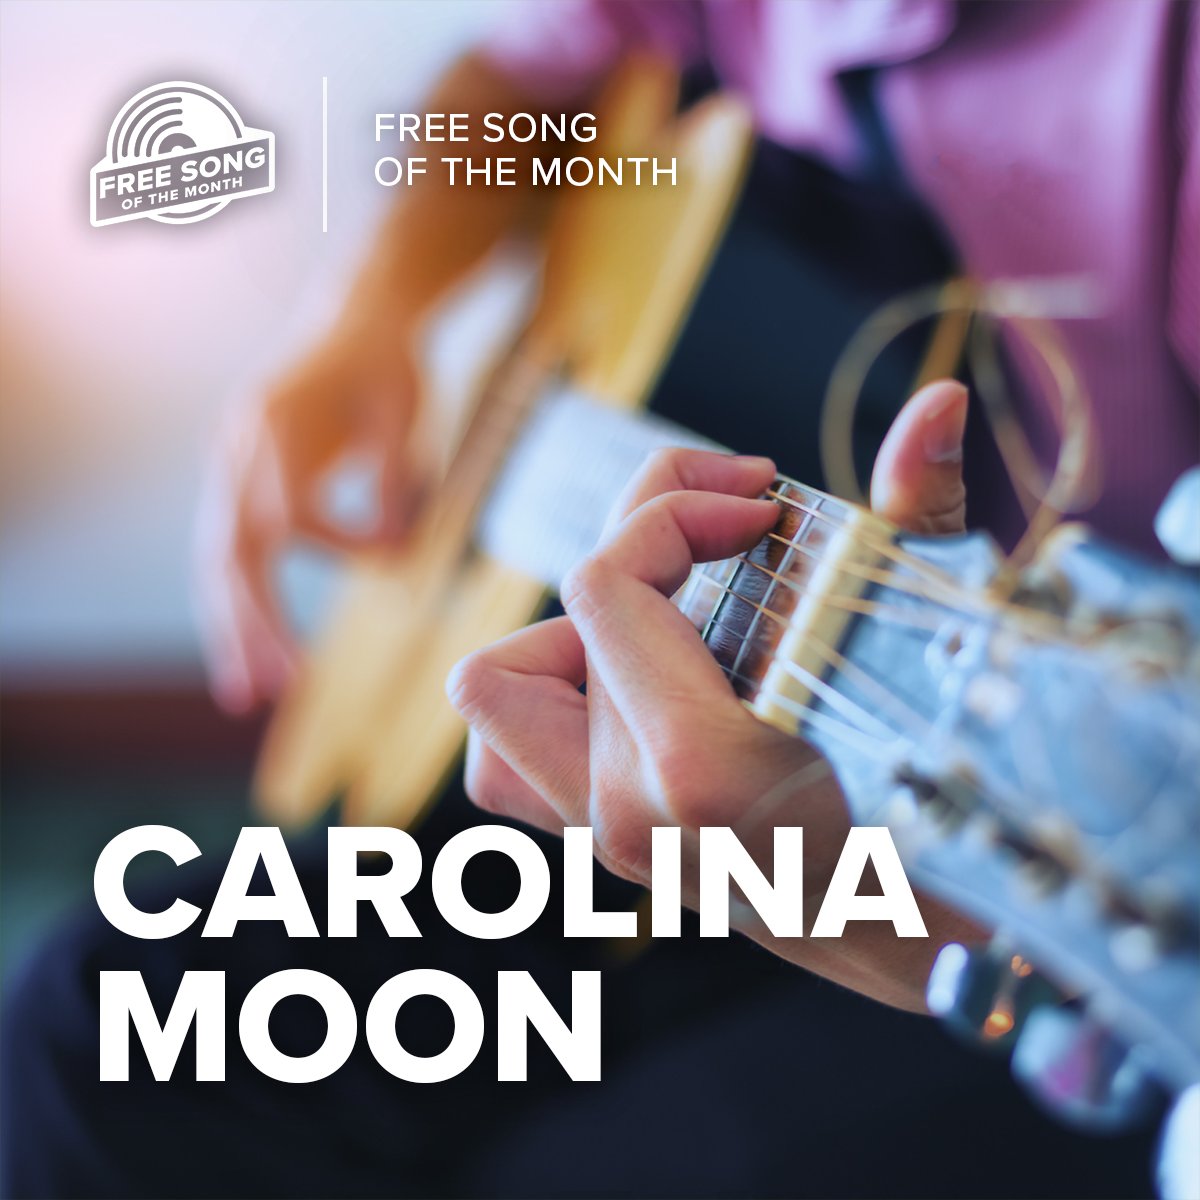 'Carolina Moon' is a popular song about longing for the one you love by the light of the 'dreamy Carolina moon.' Written in 1924 by Joe Burke and Benny Davis, this heartfelt classic is free all May long at musicnotes.com/free/! #freesongofthemonth #musicnotes